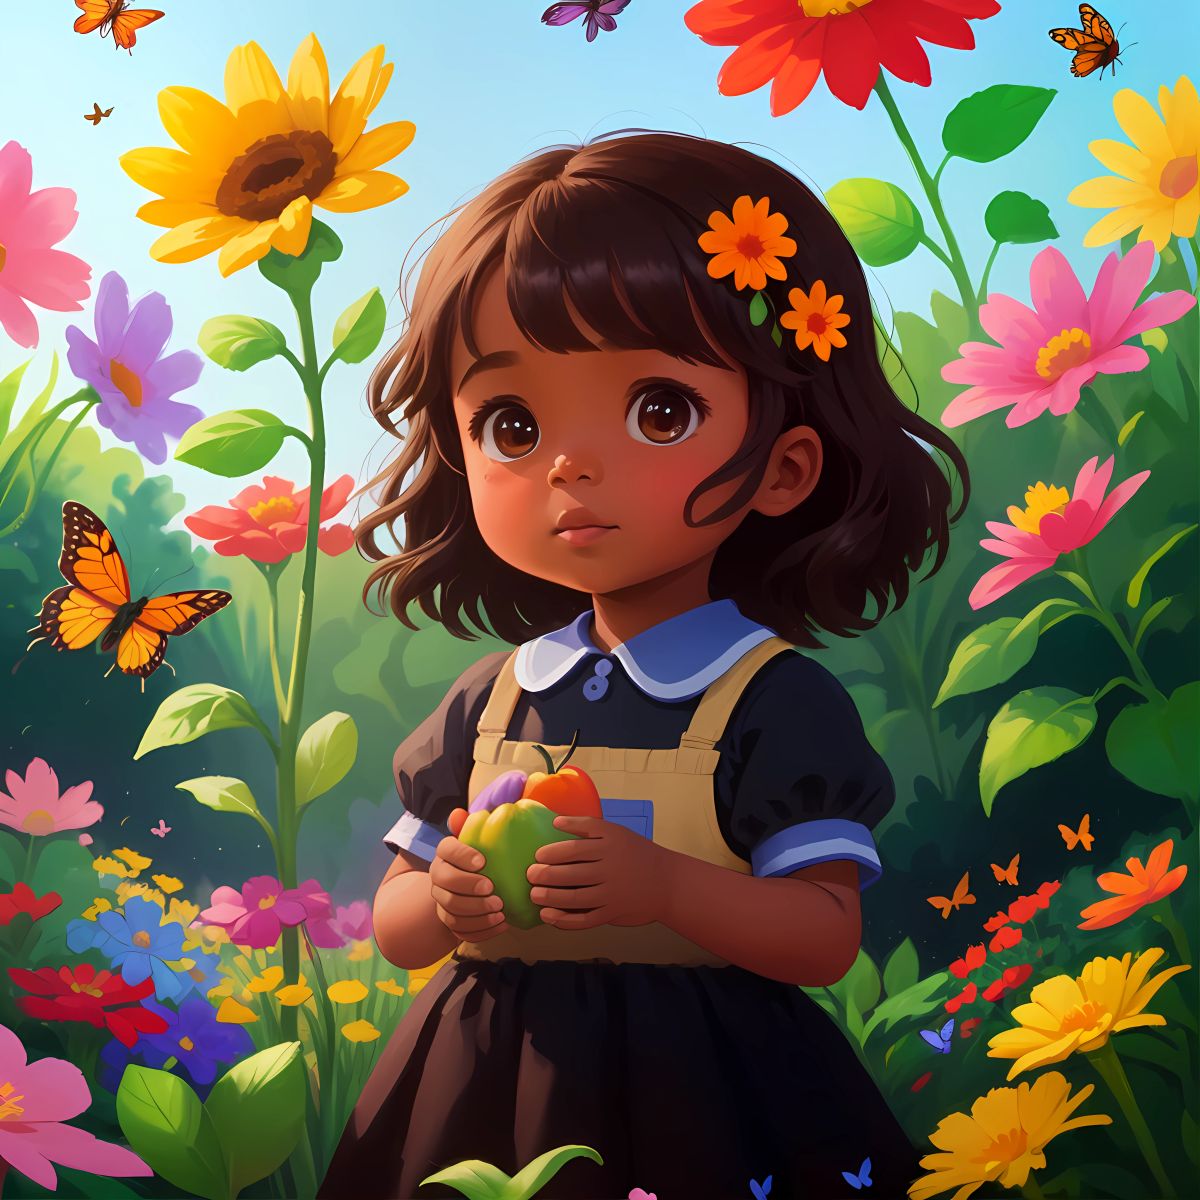 Eva's garden filled with colorful flowers, fruits, and vegetables, attracting butterflies, bees, and birds.